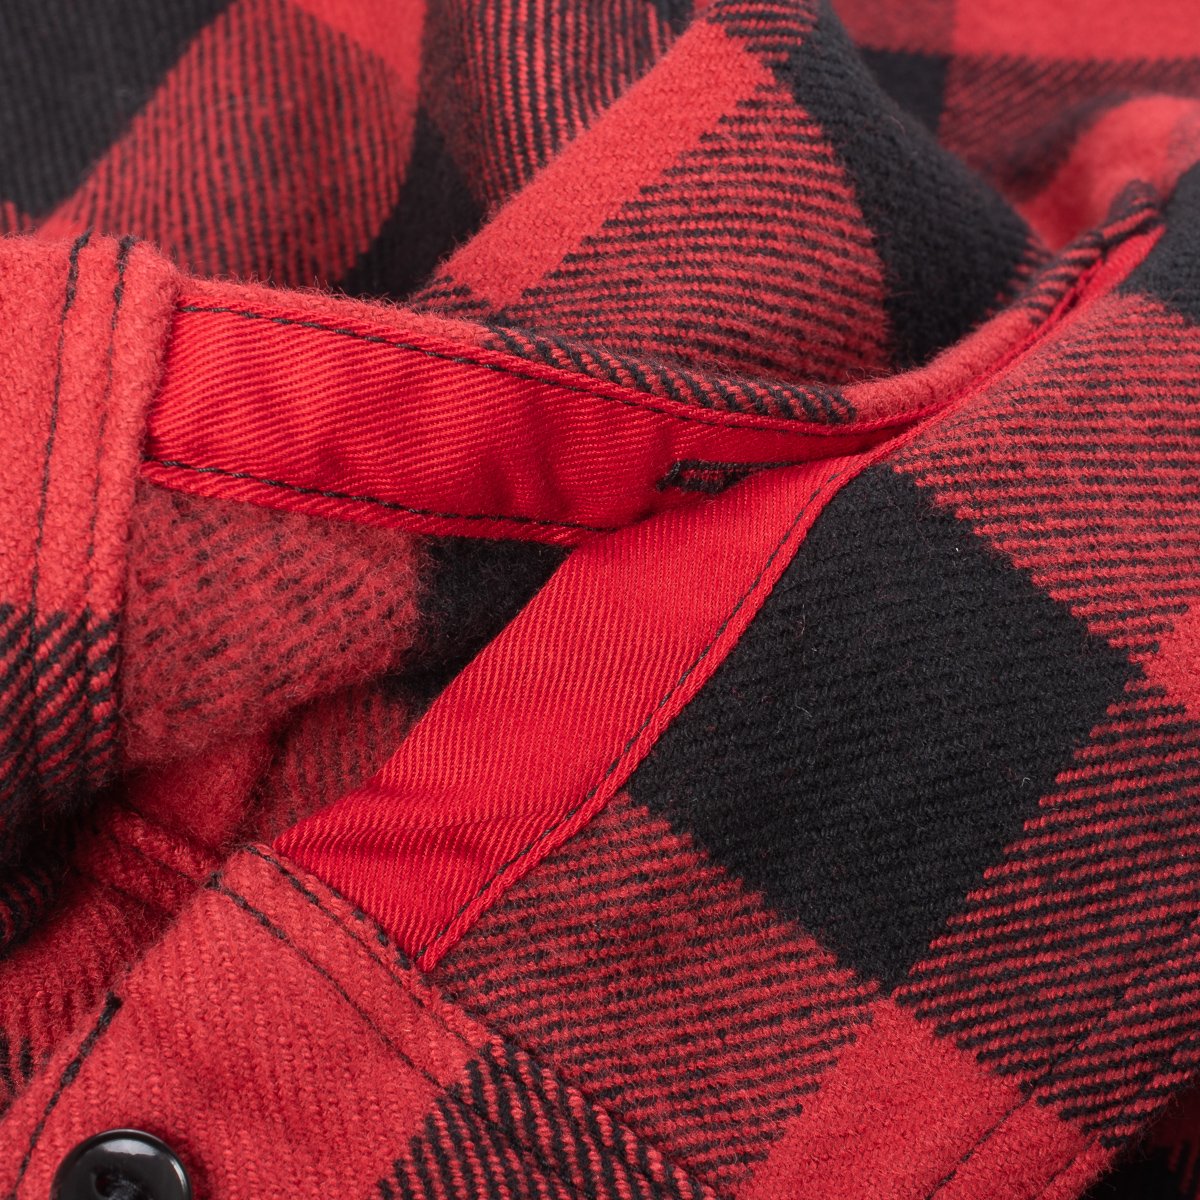 Buying Guide to Well-Made and Essential Heavy Flannels for Denimheads